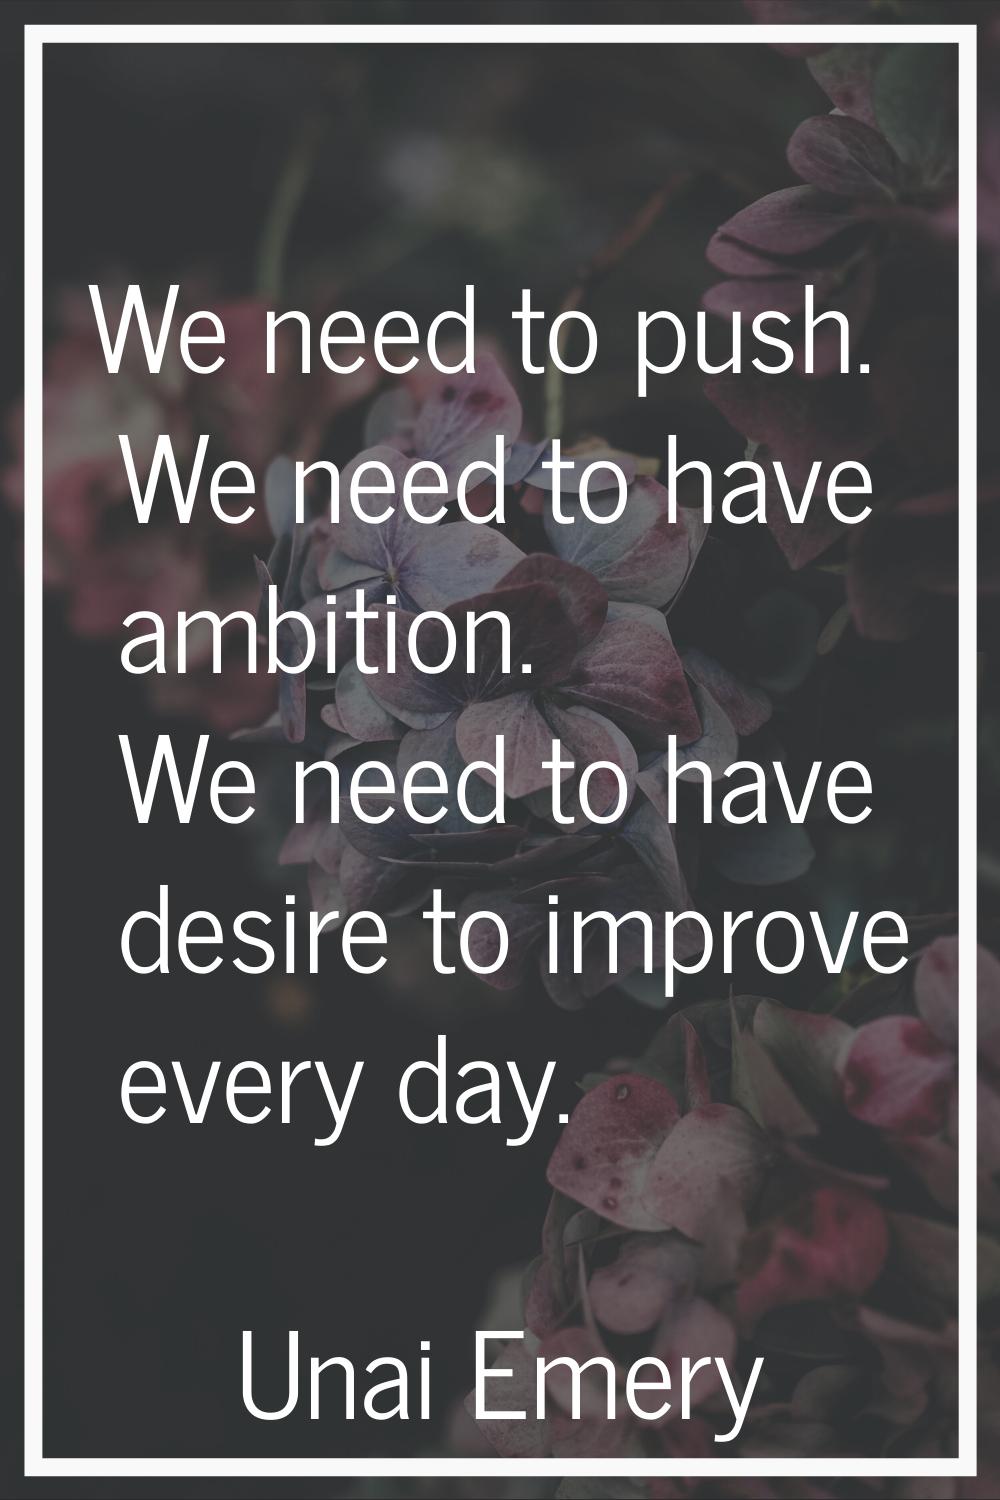 We need to push. We need to have ambition. We need to have desire to improve every day.